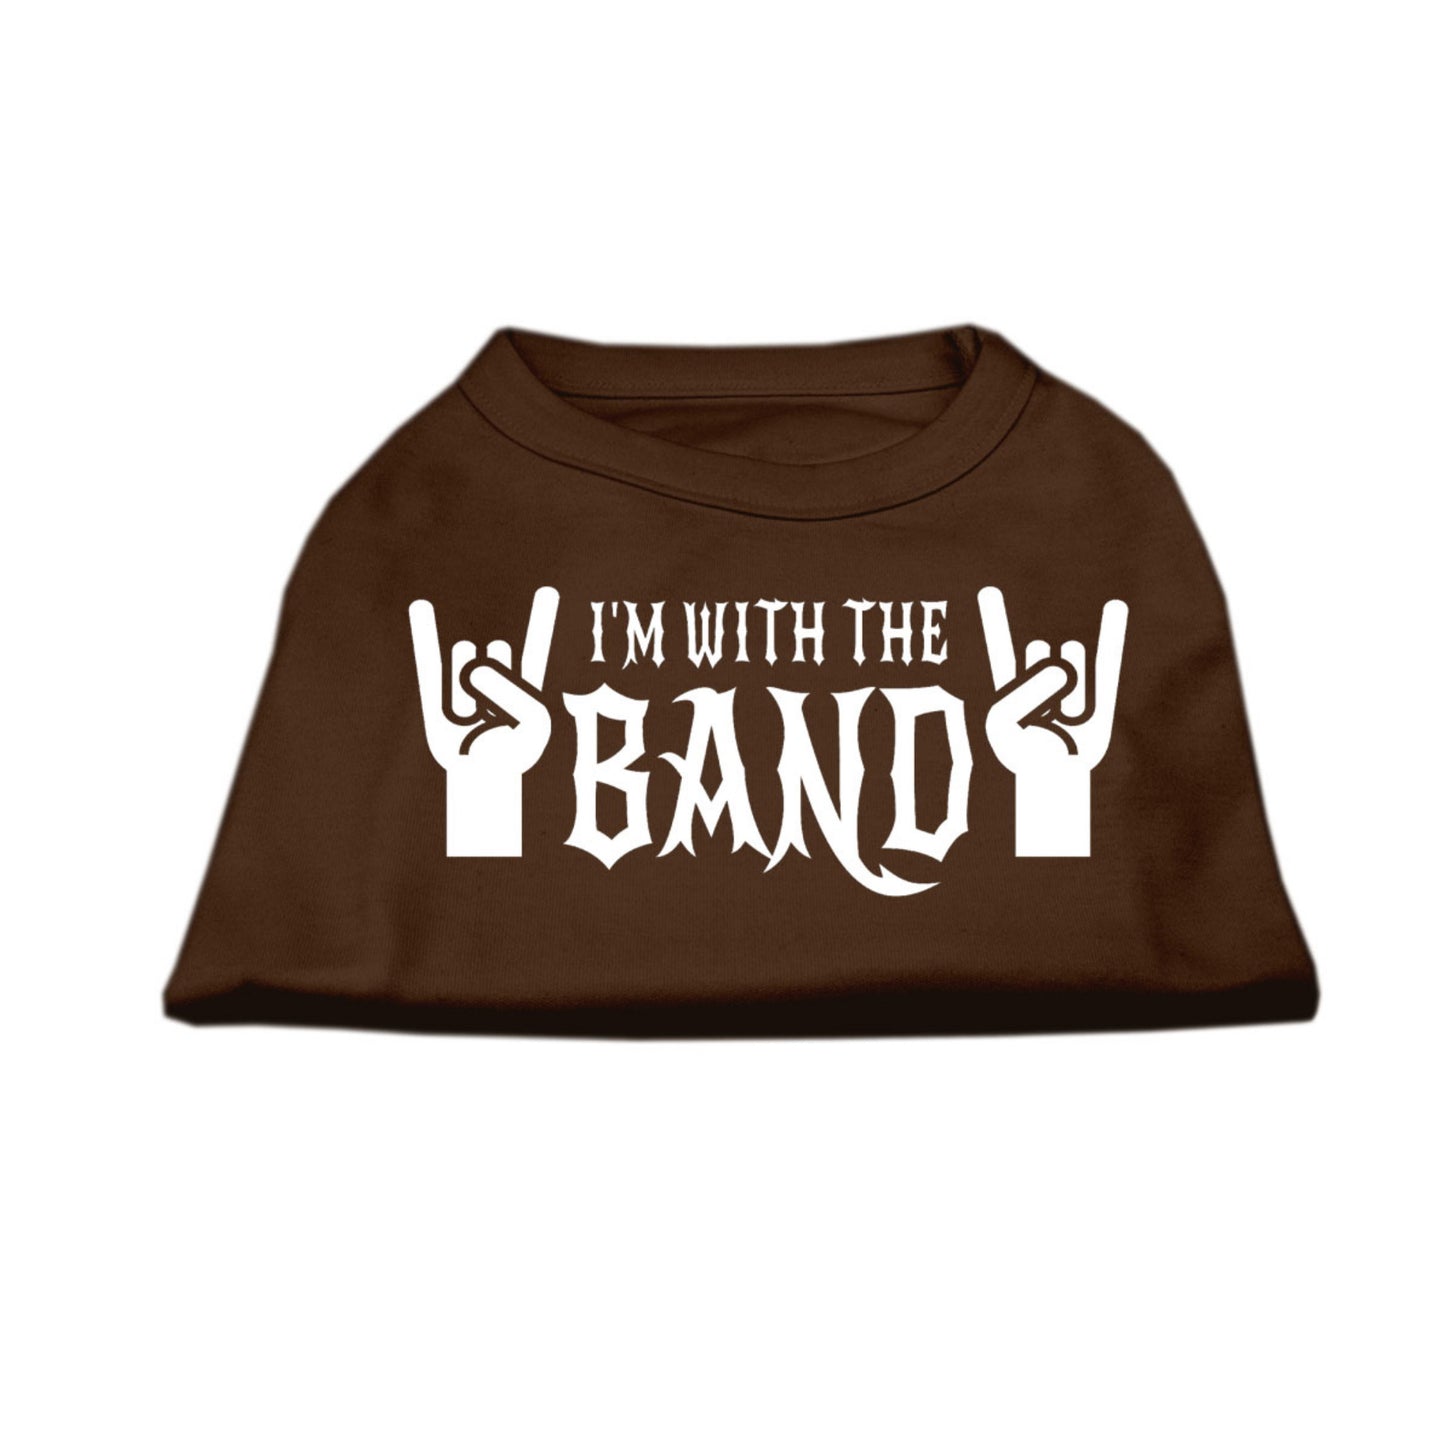 I'm With The Band Pet Shirt Brown